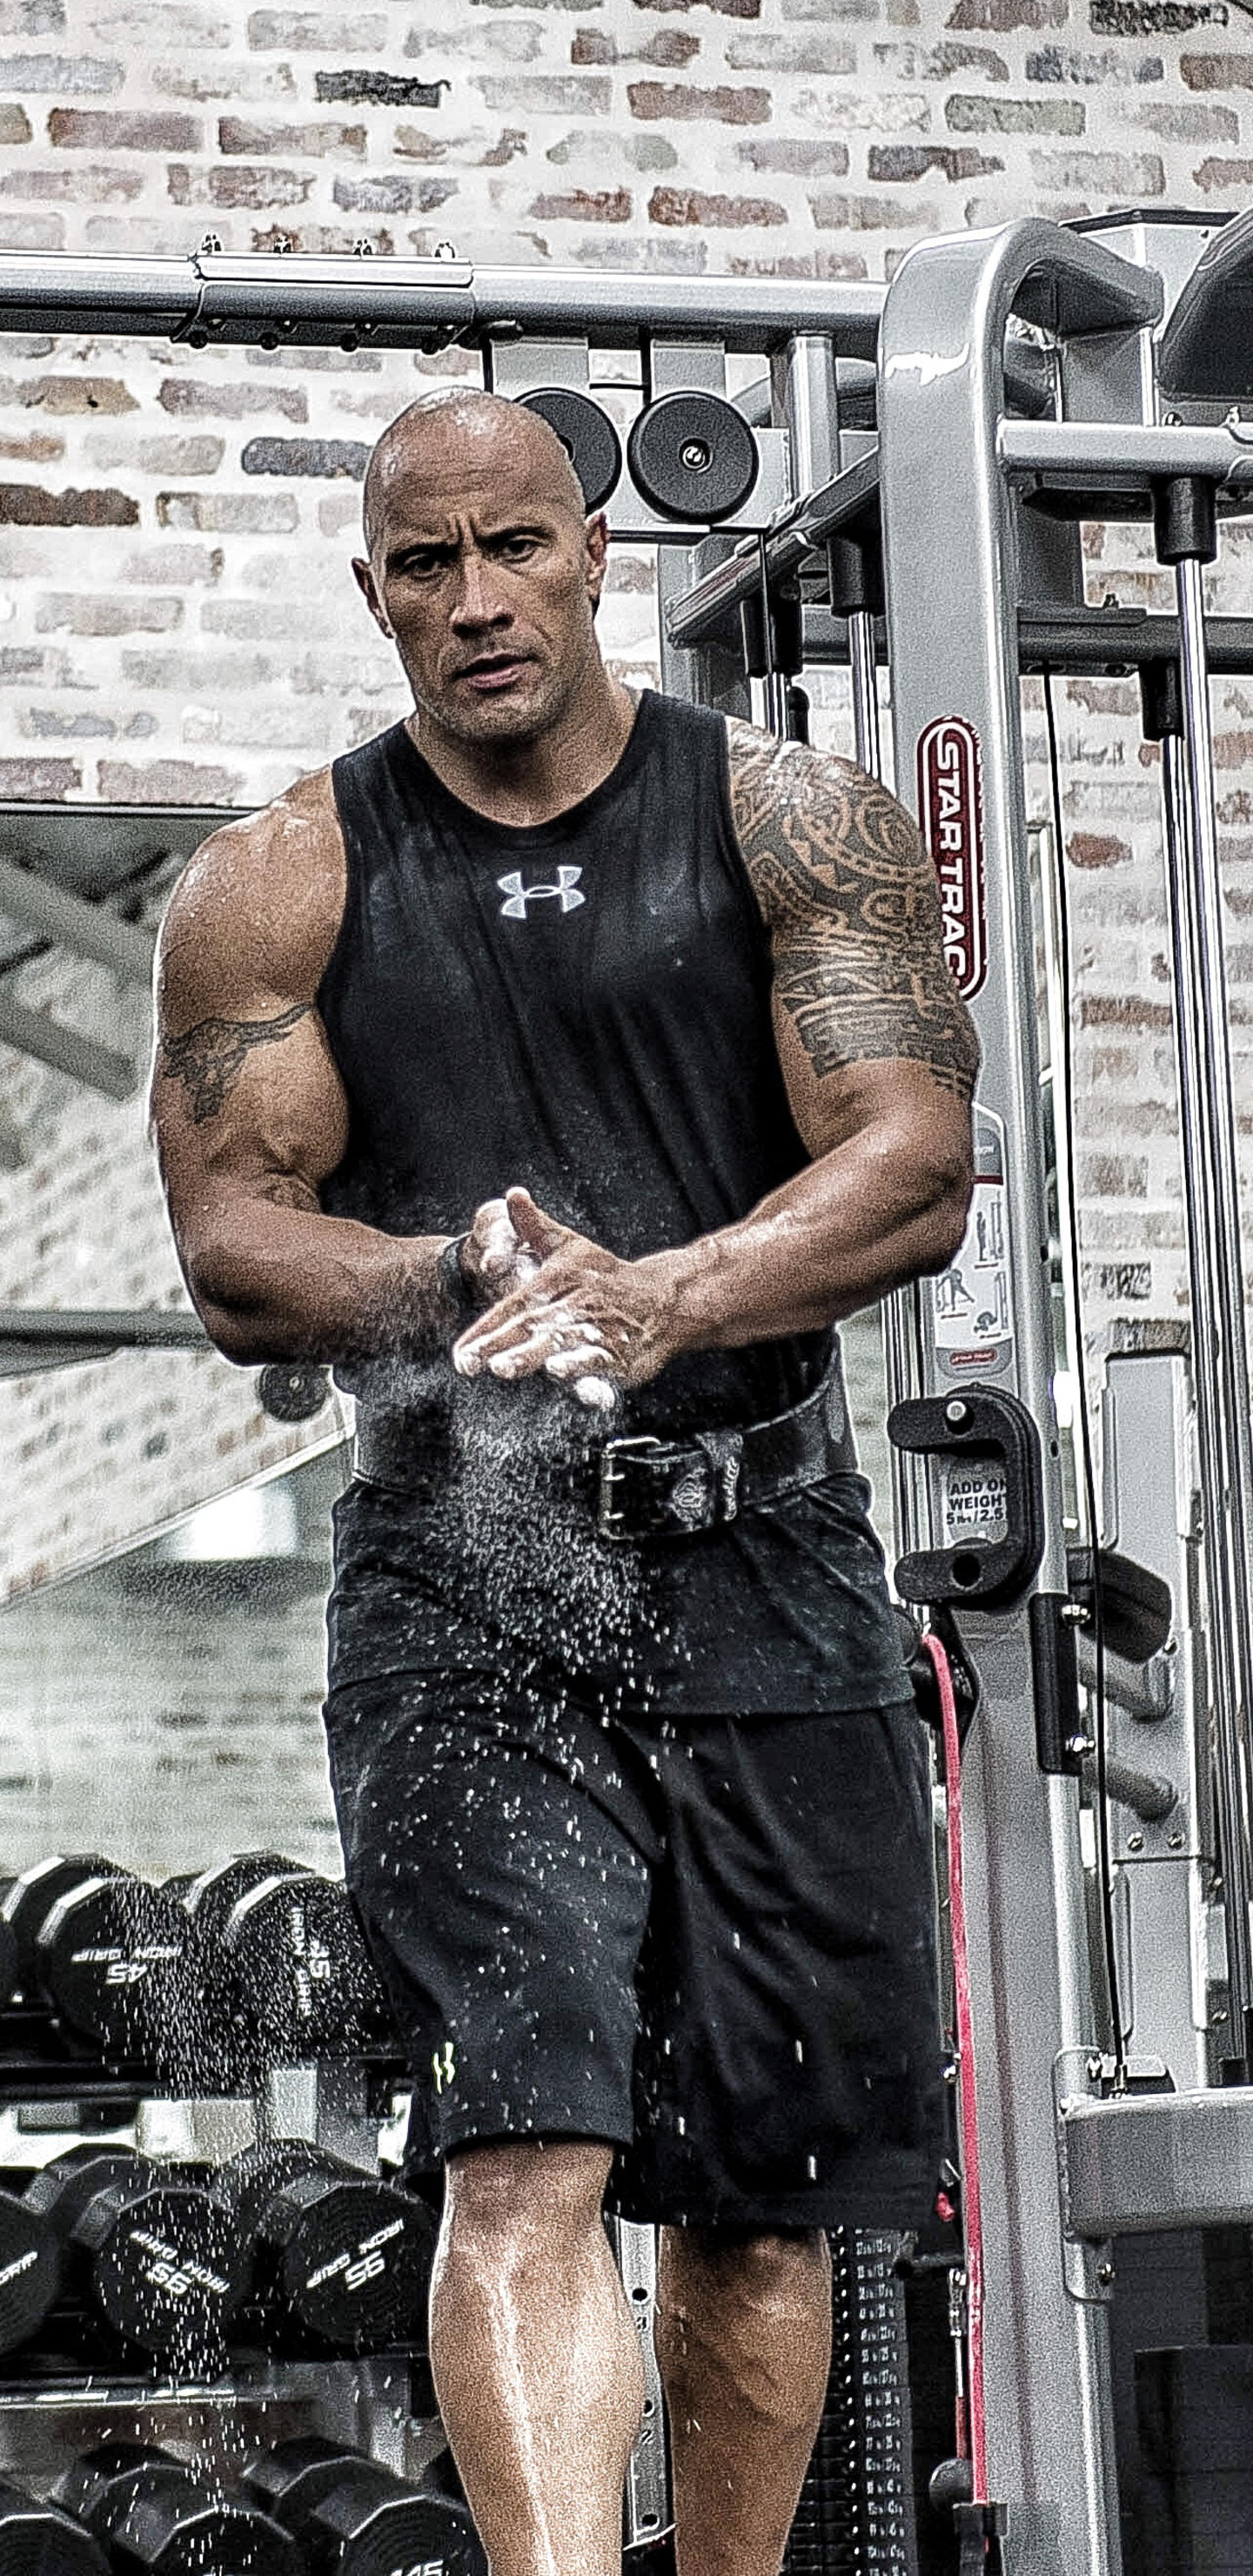 1440x2960 Dwayne Johnson In Gym 4k Samsung Galaxy Note 9,8, S9,S8,S8+ QHD  HD 4k Wallpapers, Images, Backgrounds, Photos and Pictures